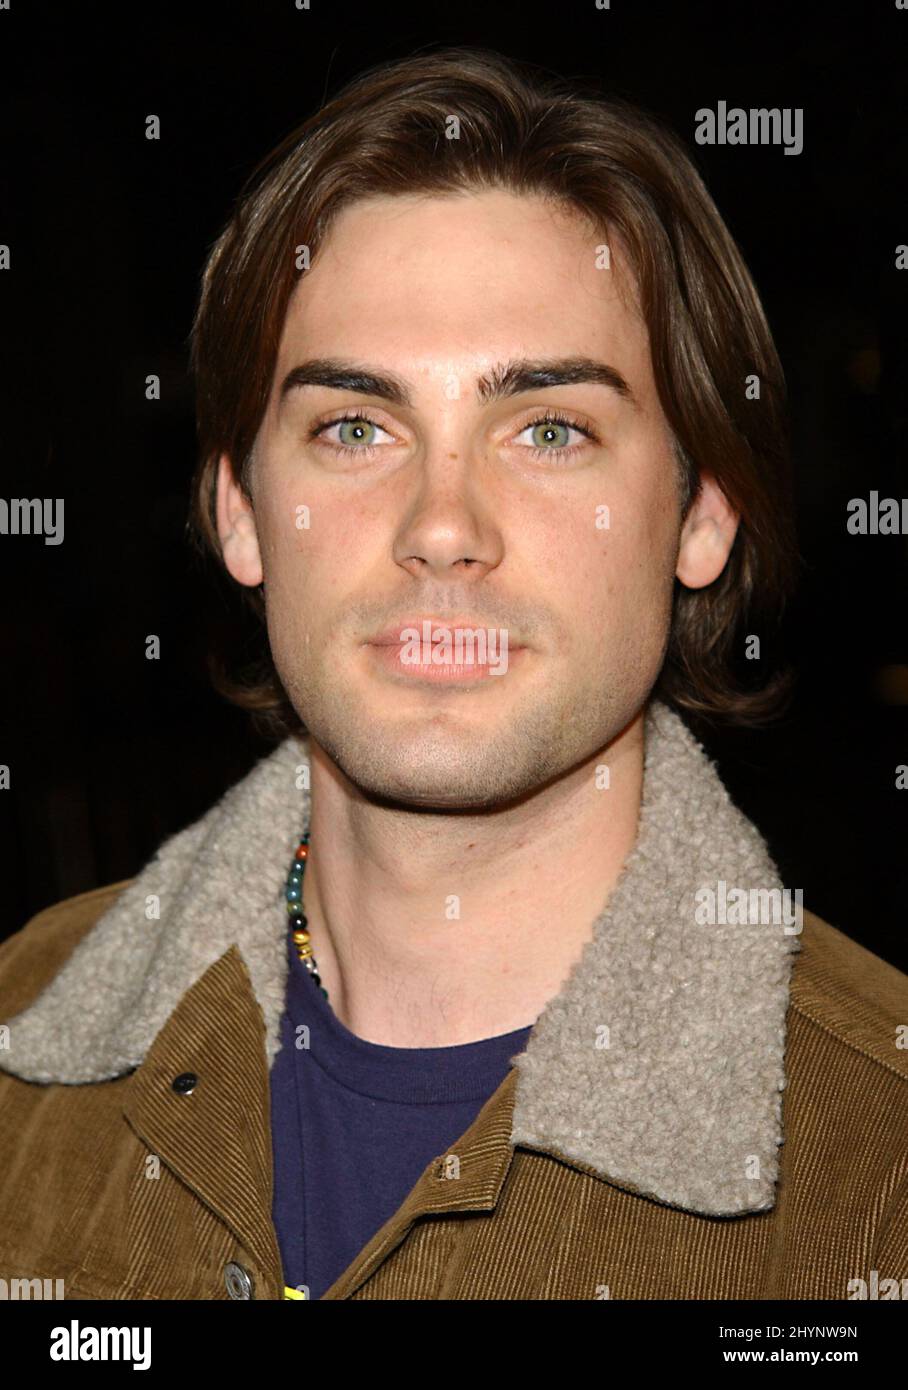 DREW FULLER ATTENDS THE 'PAYCHECK' PREMIERE AT GRAUMANN'S CHINESE THEATRE IN HOLLYWOOD. PICTURE: UK PRESS Stock Photo